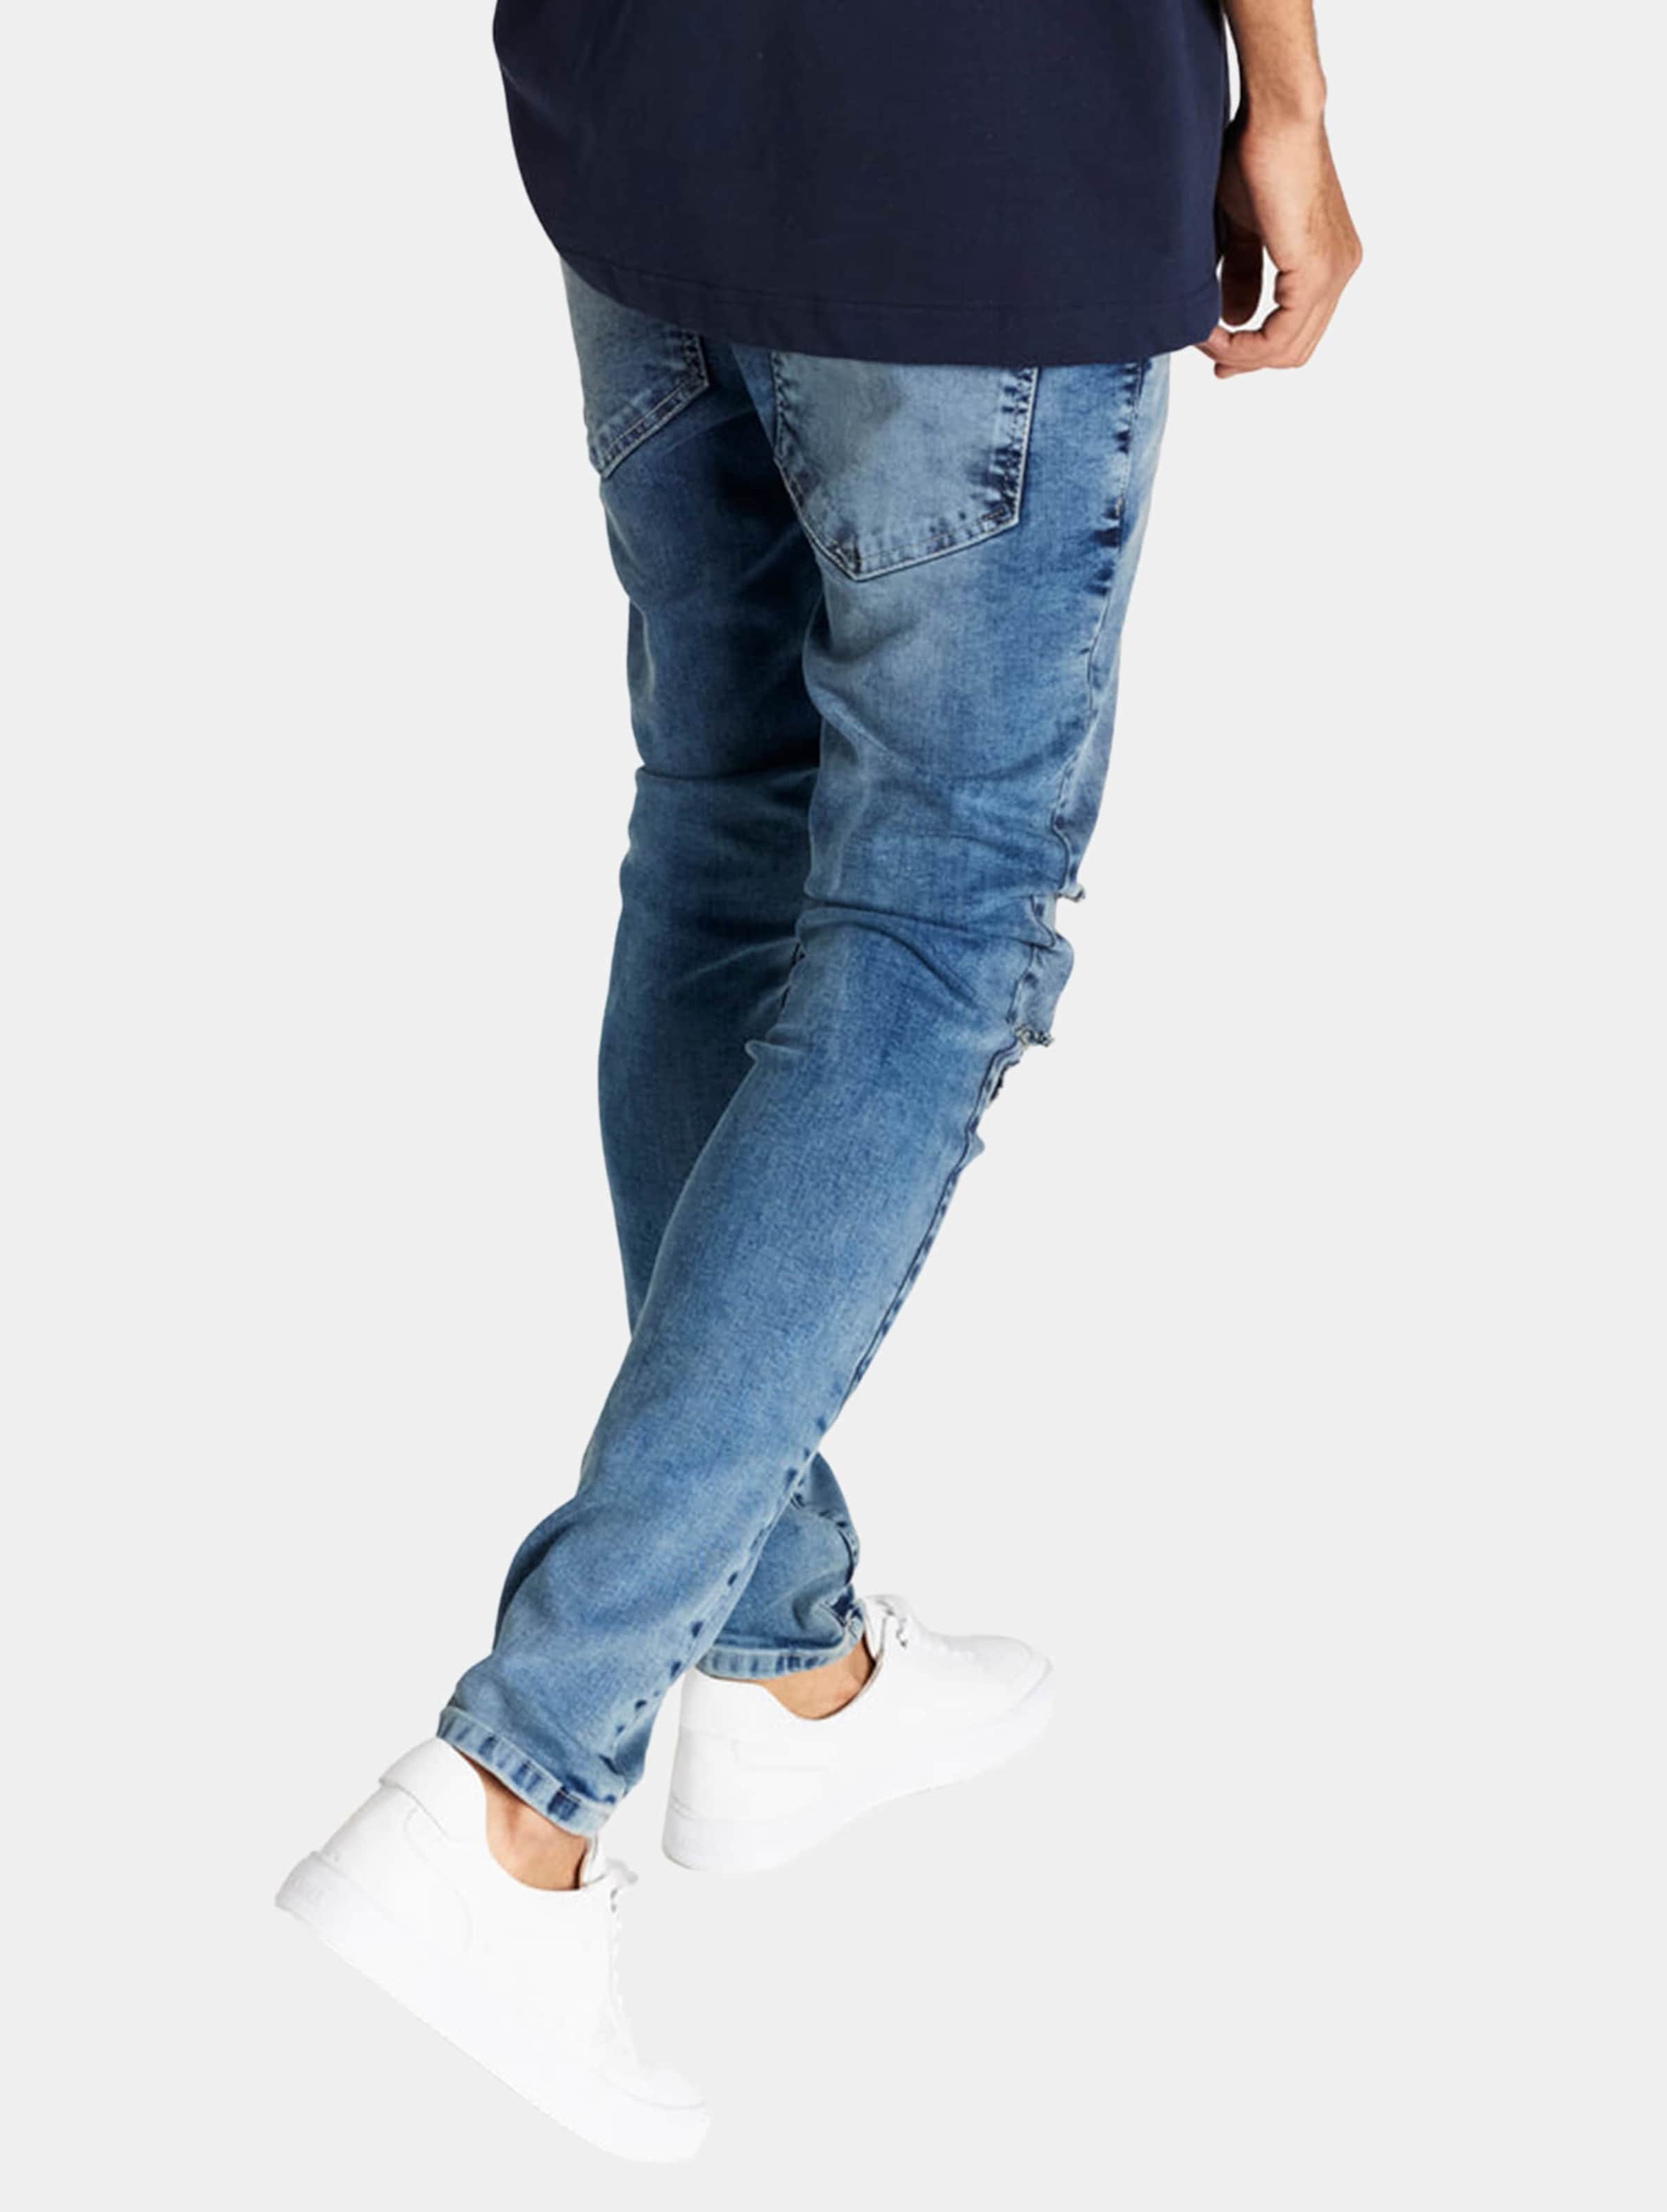 Men's Ripped Blue Jeans Distressed Denim Skinny Washed Pants | FREE  SHIPPING | eBay